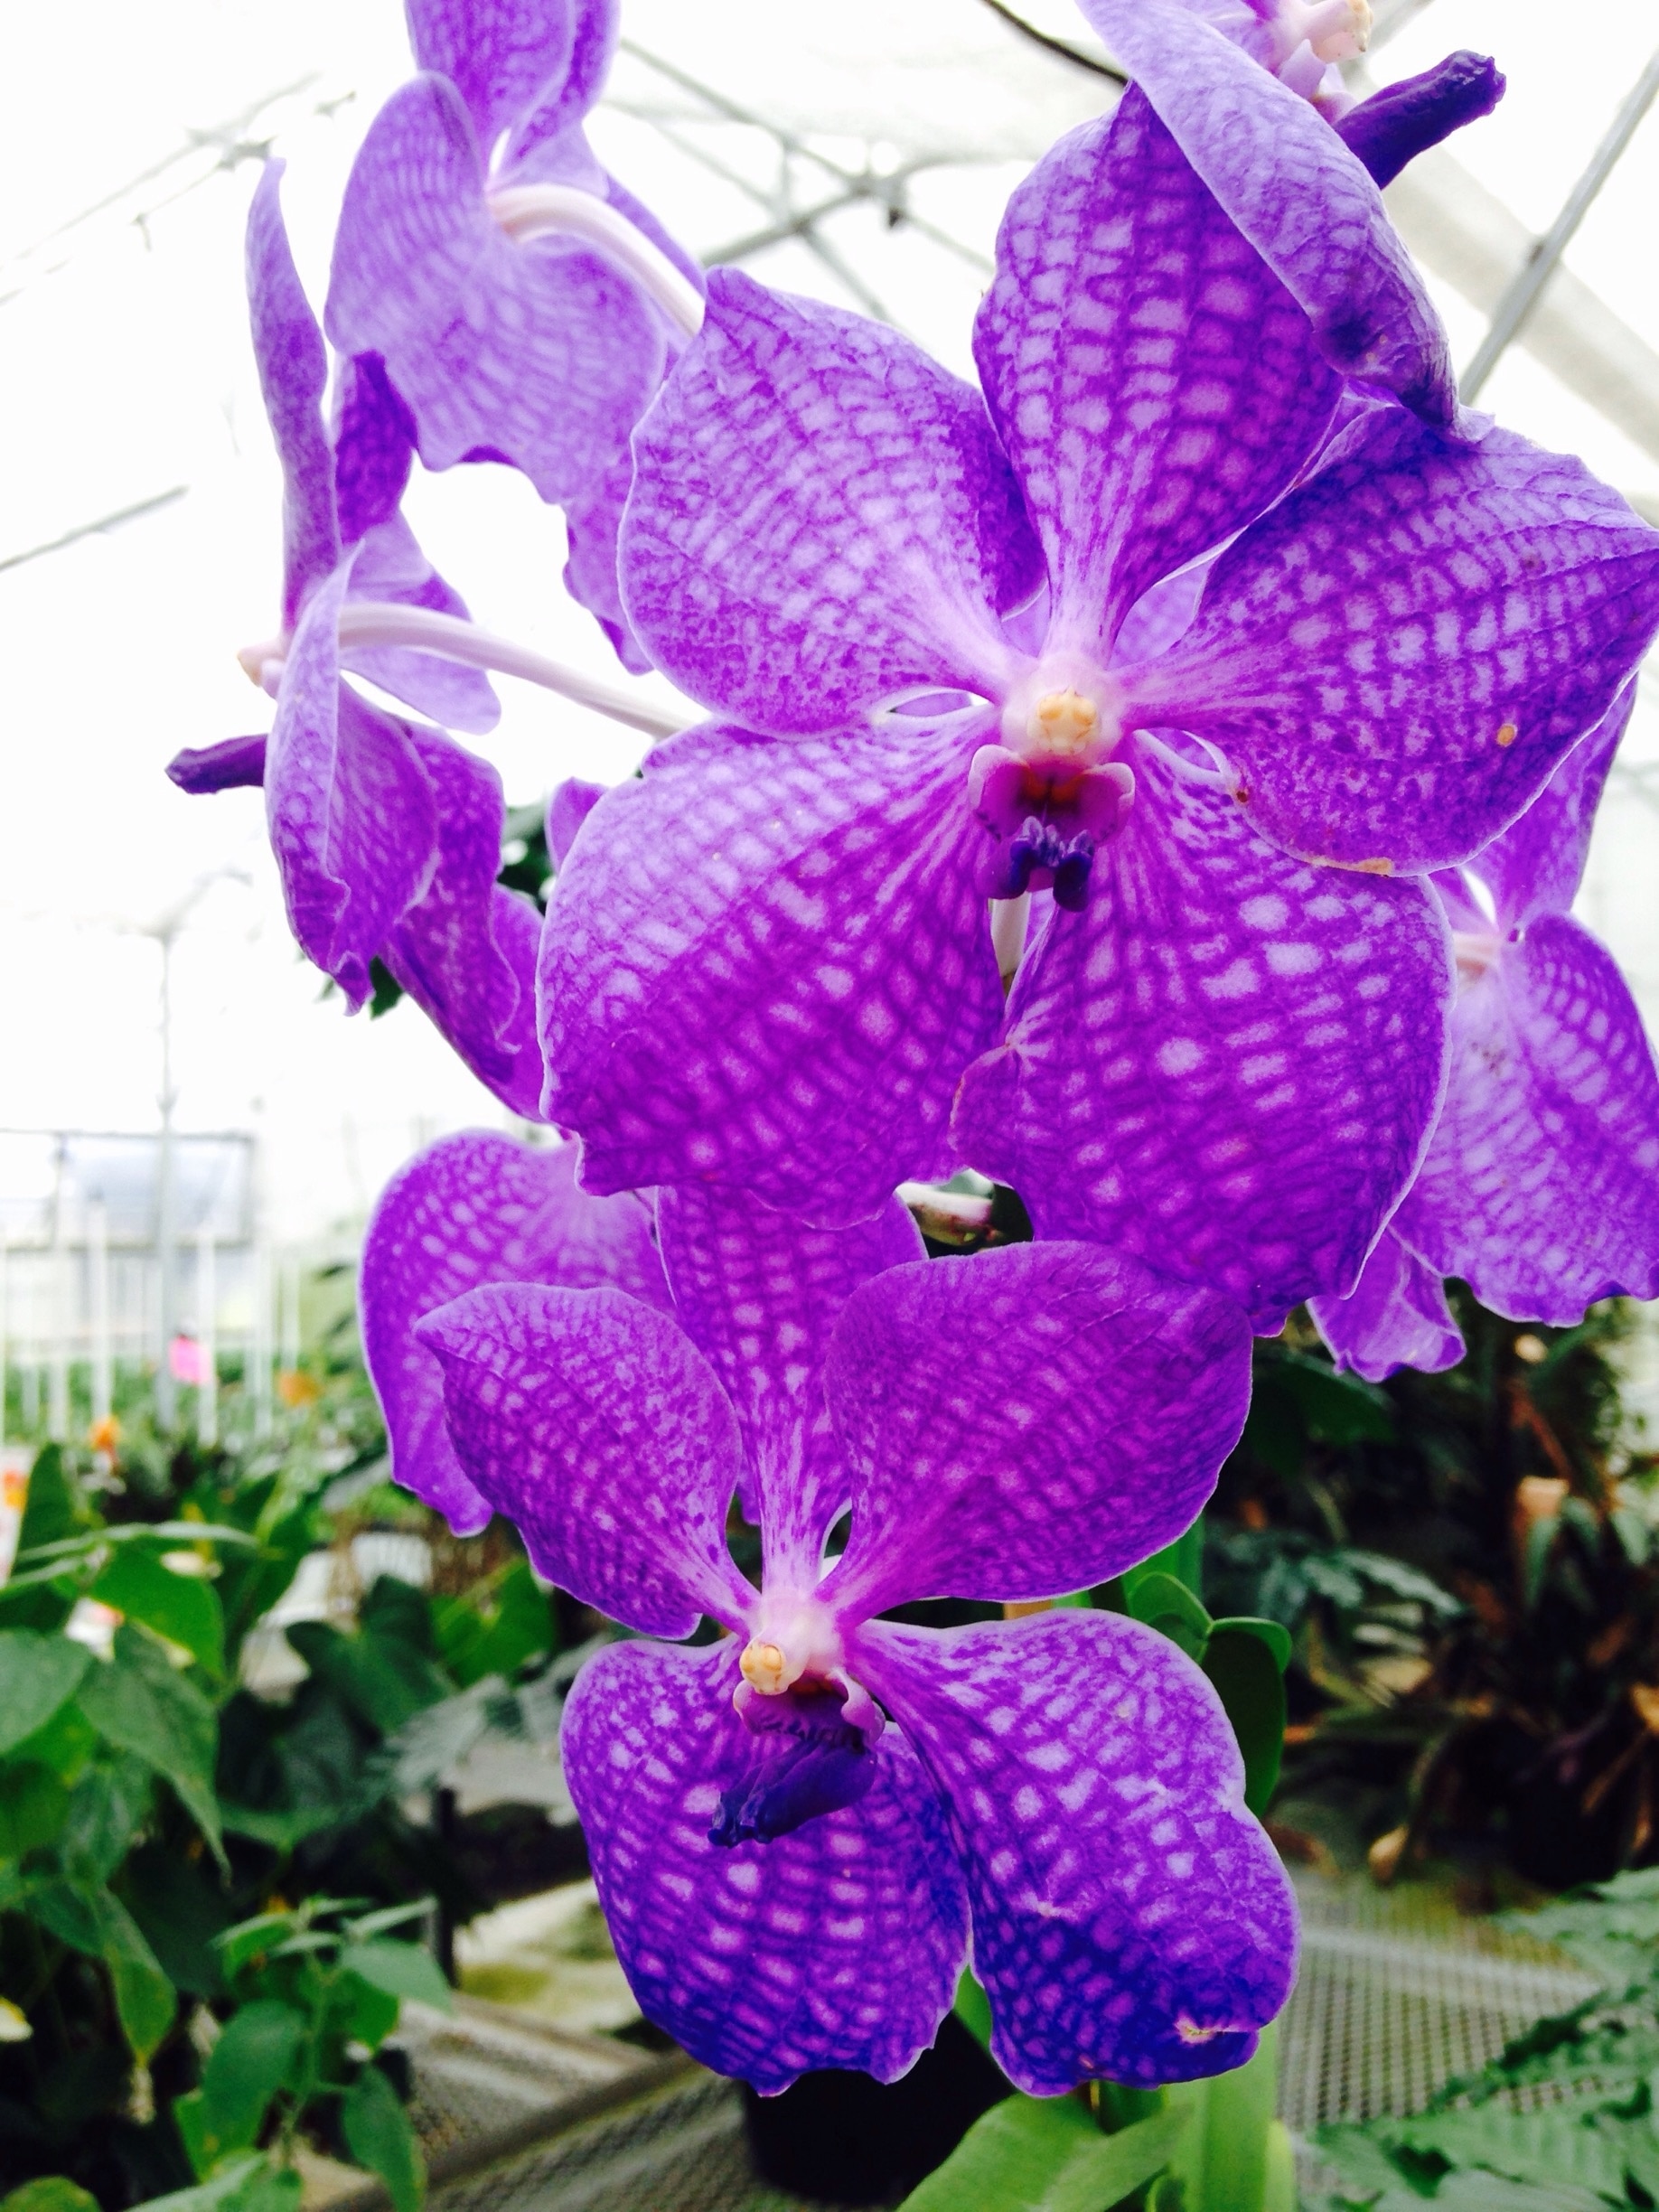 If you are an orchid fan or just an avid gardener, this place has an outstanding collection of exotic orchids that can be shipped to the mainland. 